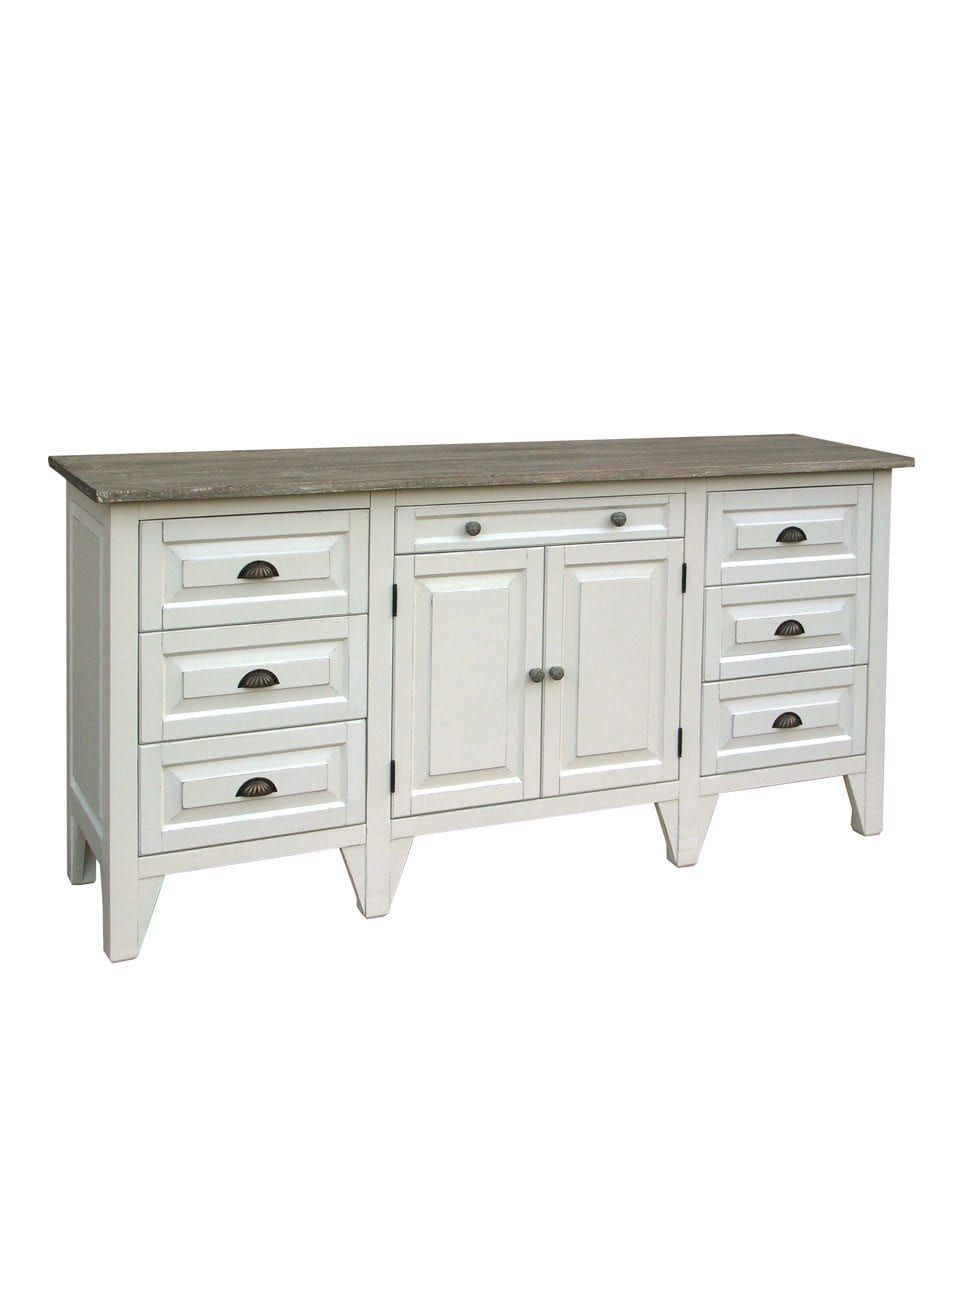 Homestead Sideboard | Cottage Home® With Home Sideboards (View 16 of 22)